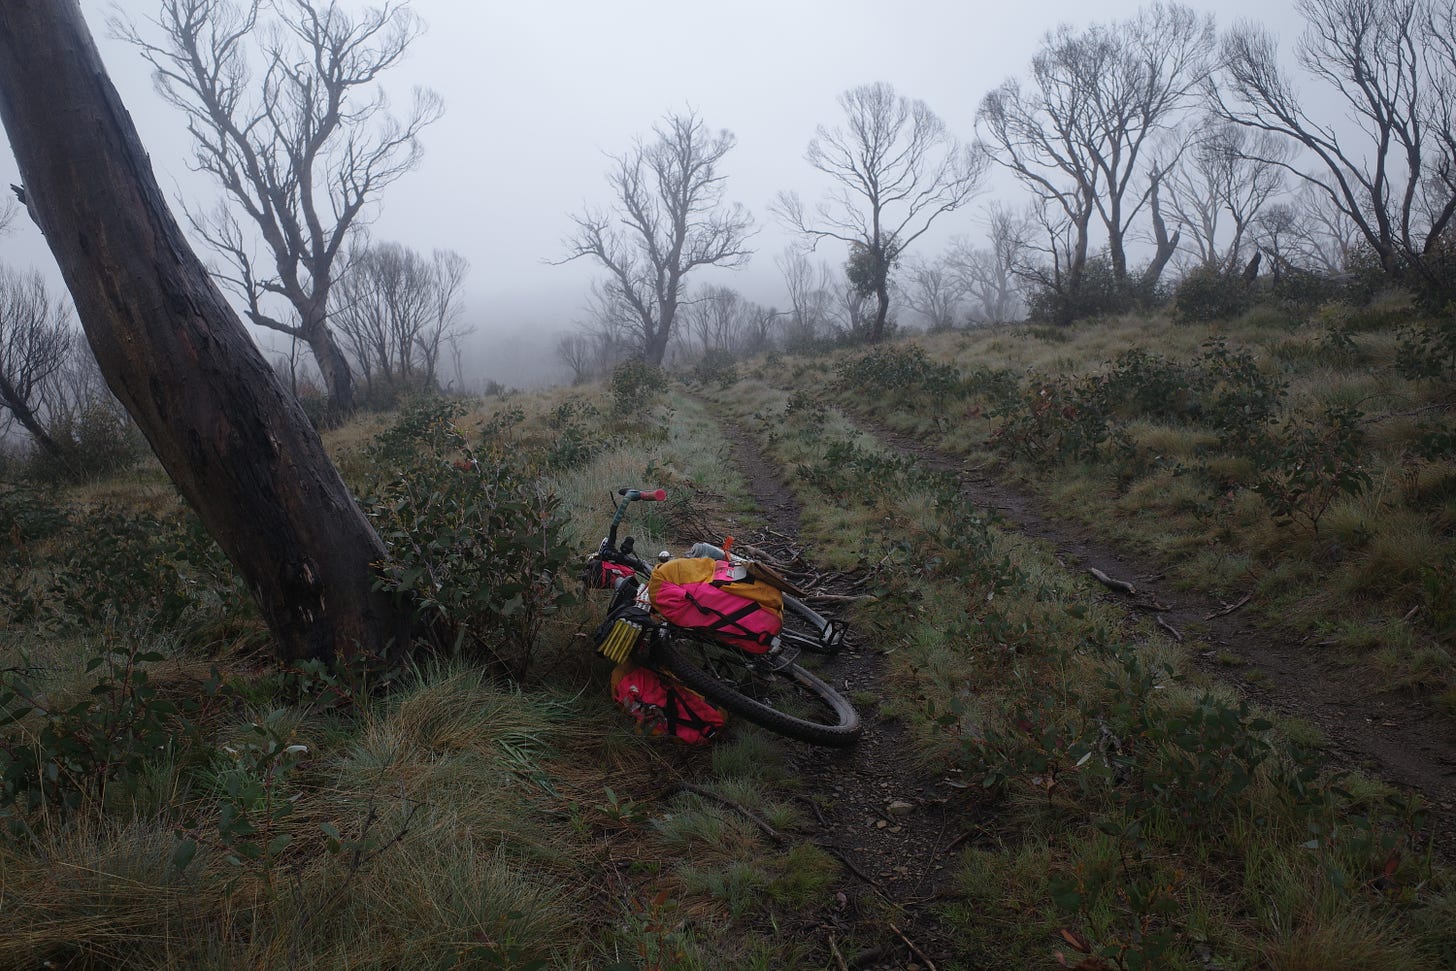 Robbie's bike in a creepy alpine landscape with spindly trees.